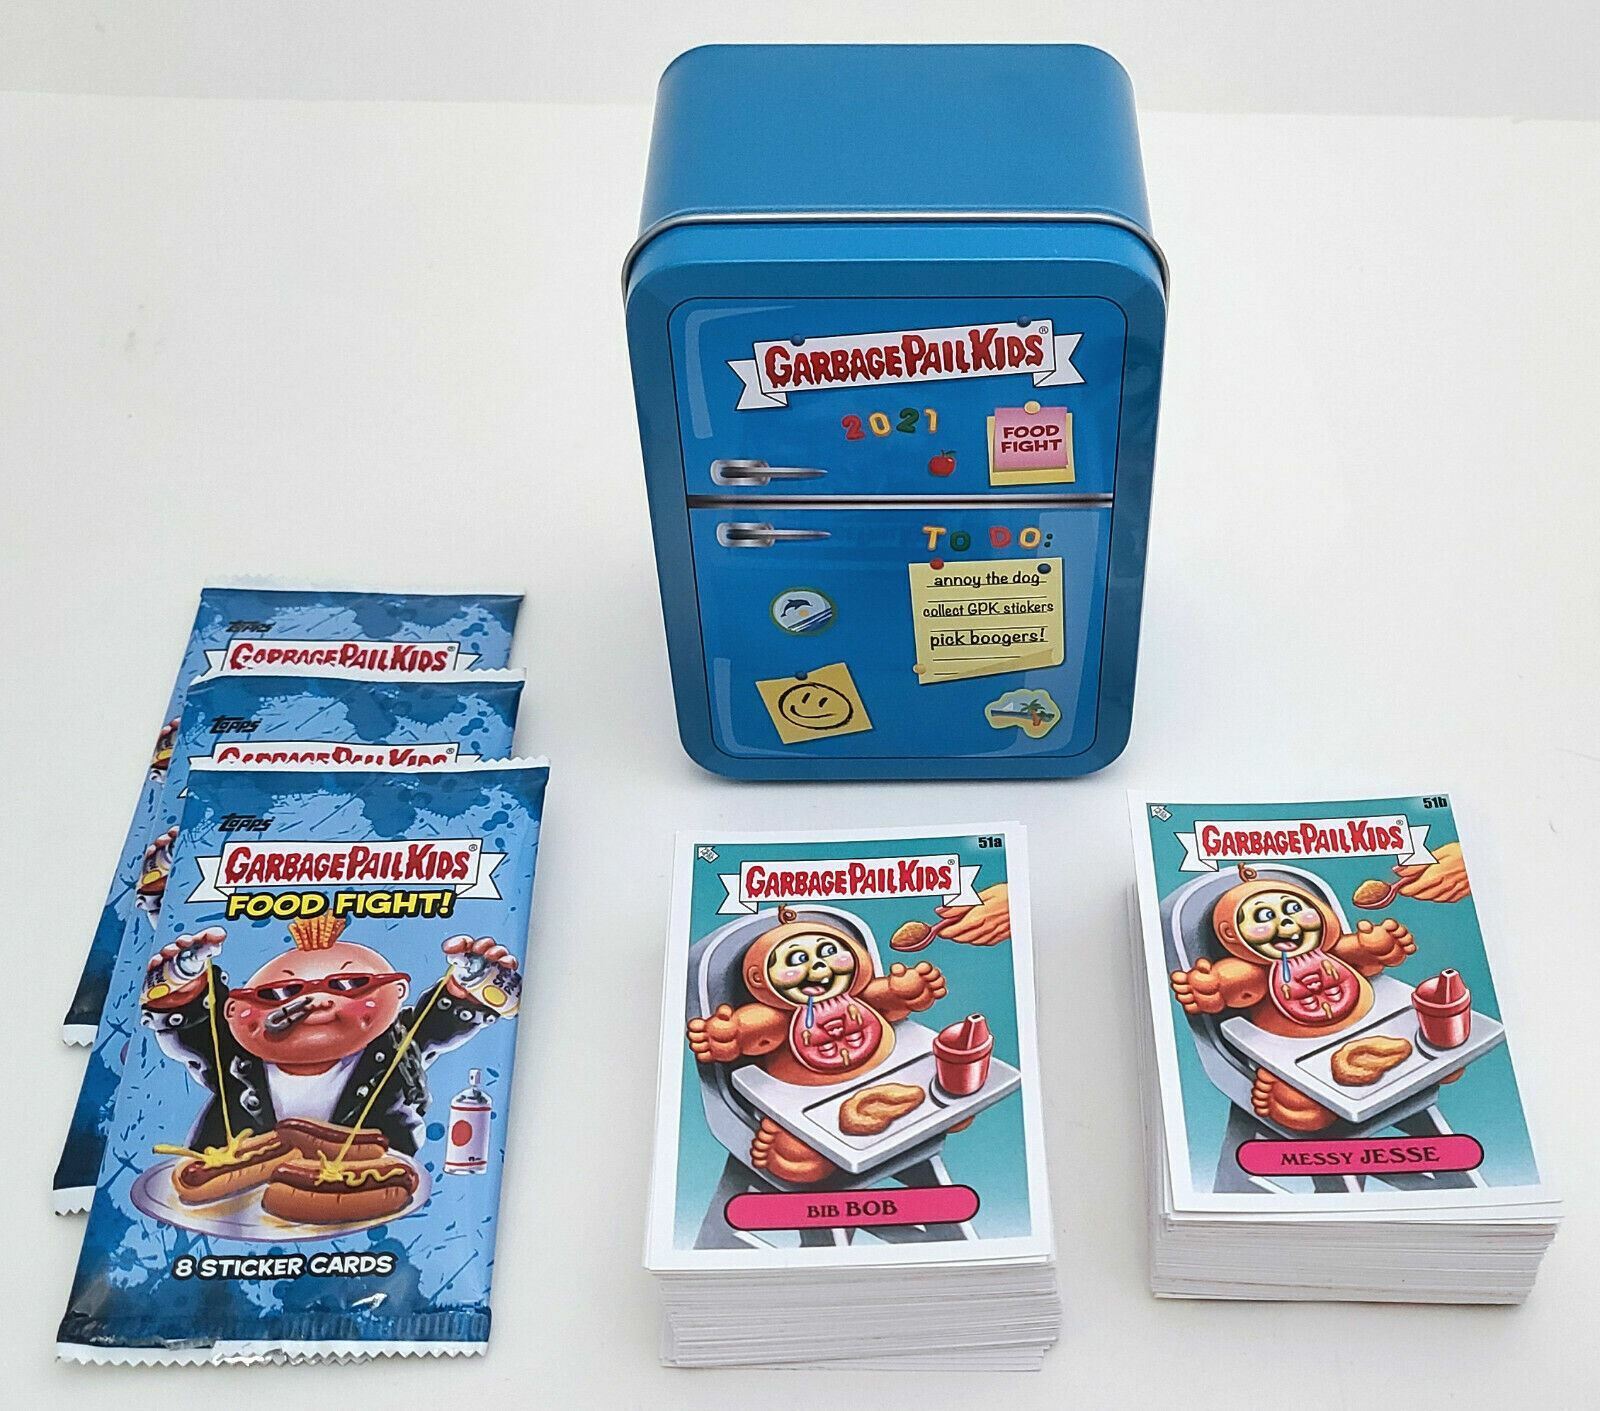 2021 Topps Garbage Pail Kids FOOD FIGHT Complete Card BASE SET Trading Card GPK